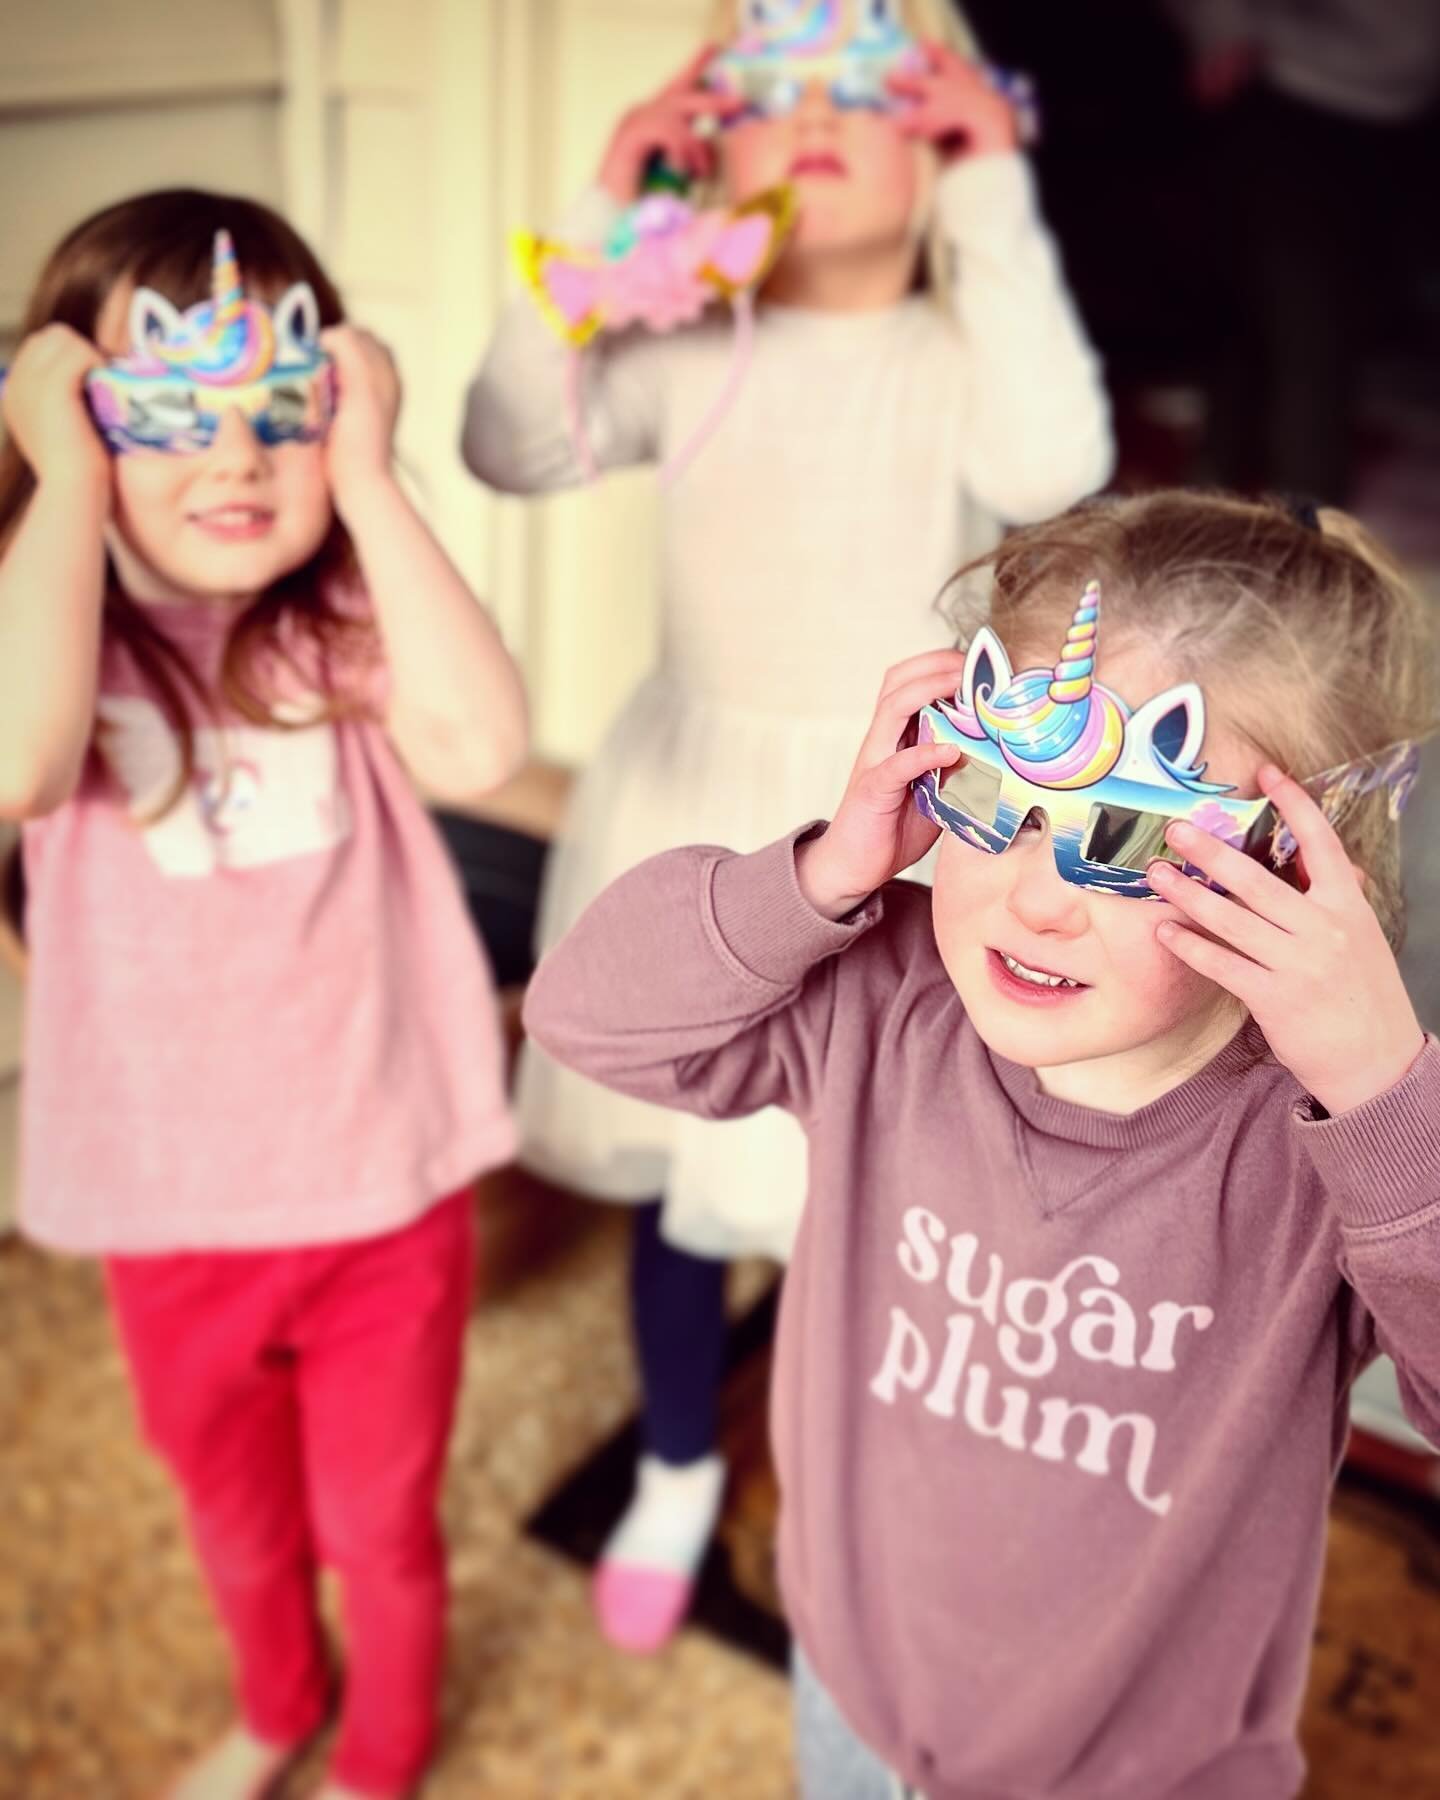 It&rsquo;s solar eclipse time! 🌘 

We can&rsquo;t wait to see our students back at school on Monday - and for the big day, we have preschool-sized (AAS-approved) solar eclipse glasses to hand out to our students so they can safely observe the skies!